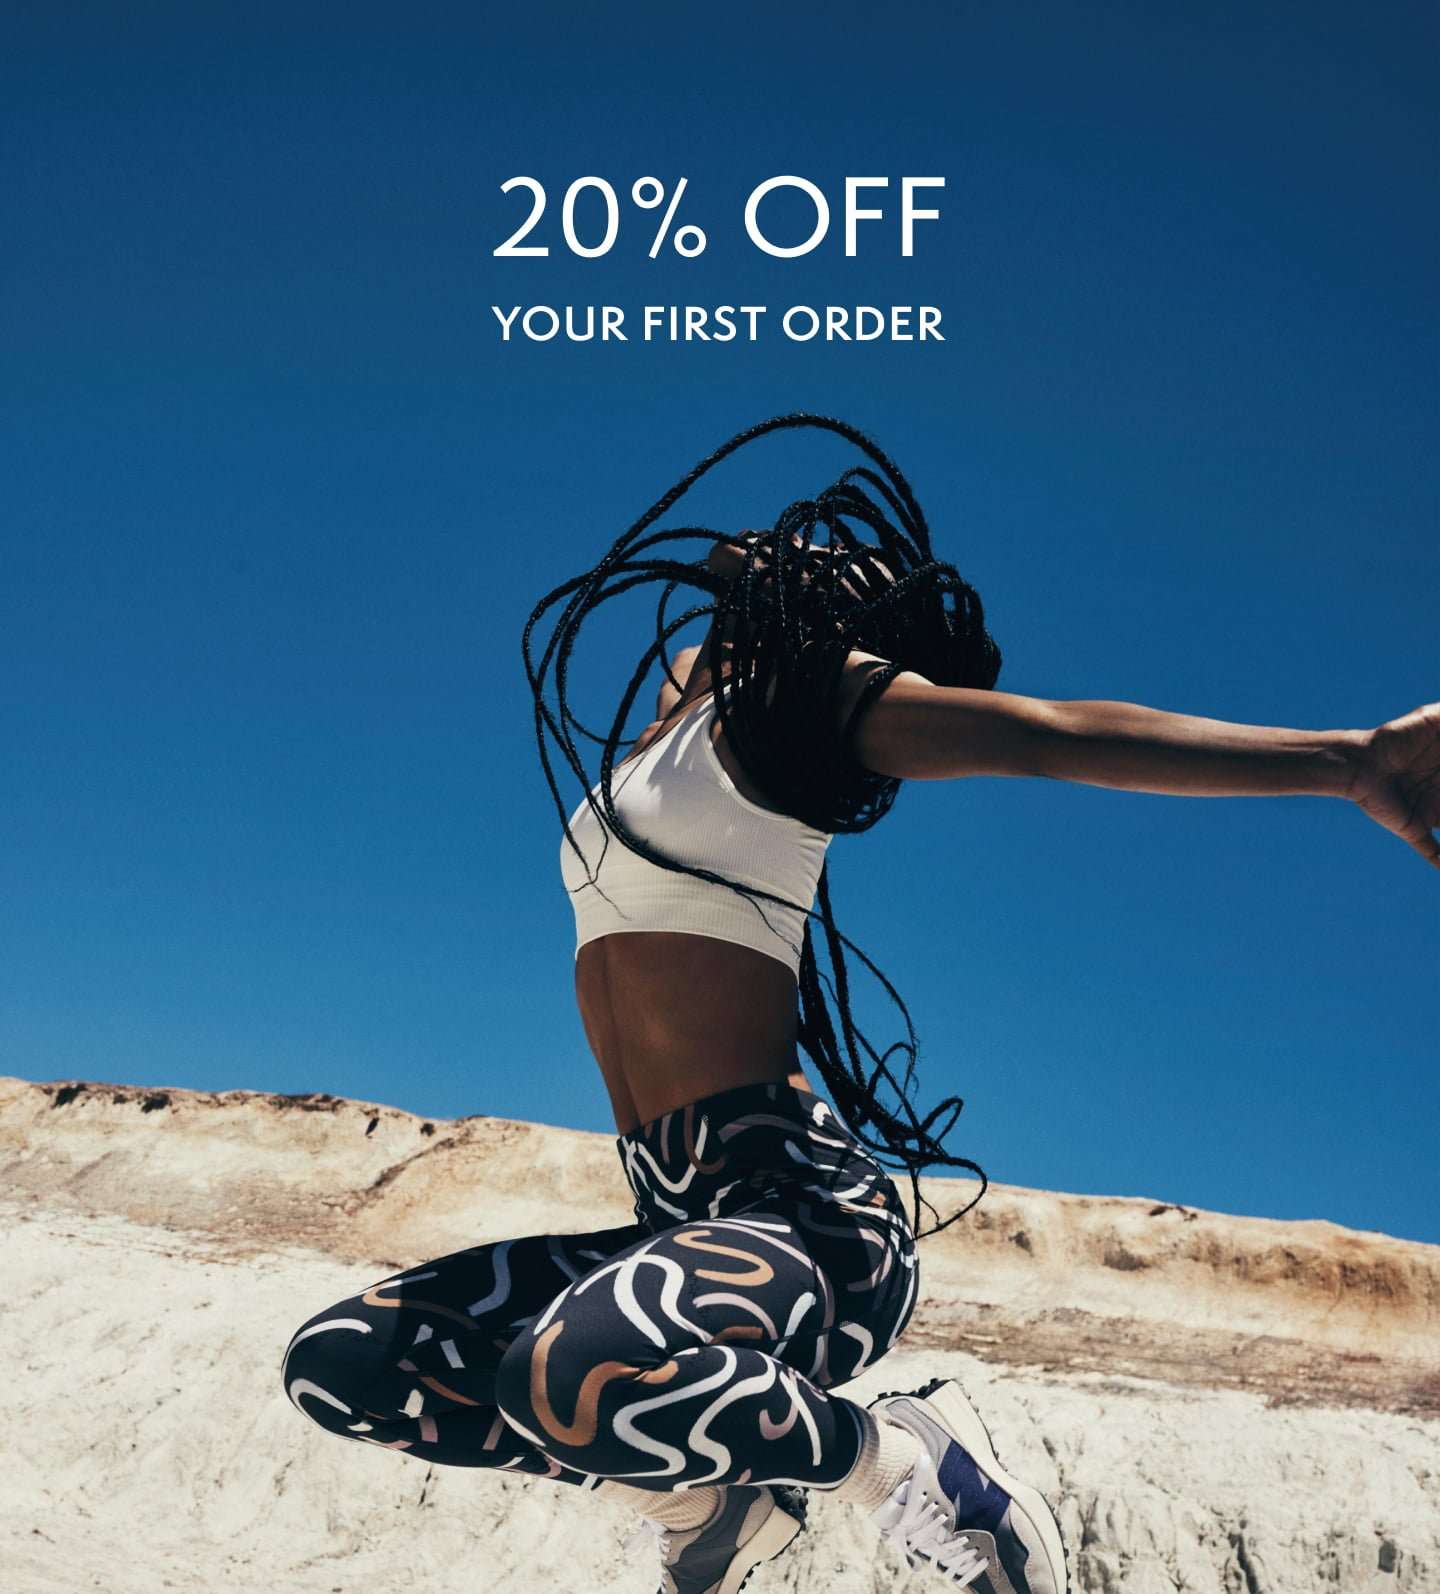 Get 20% off your first order